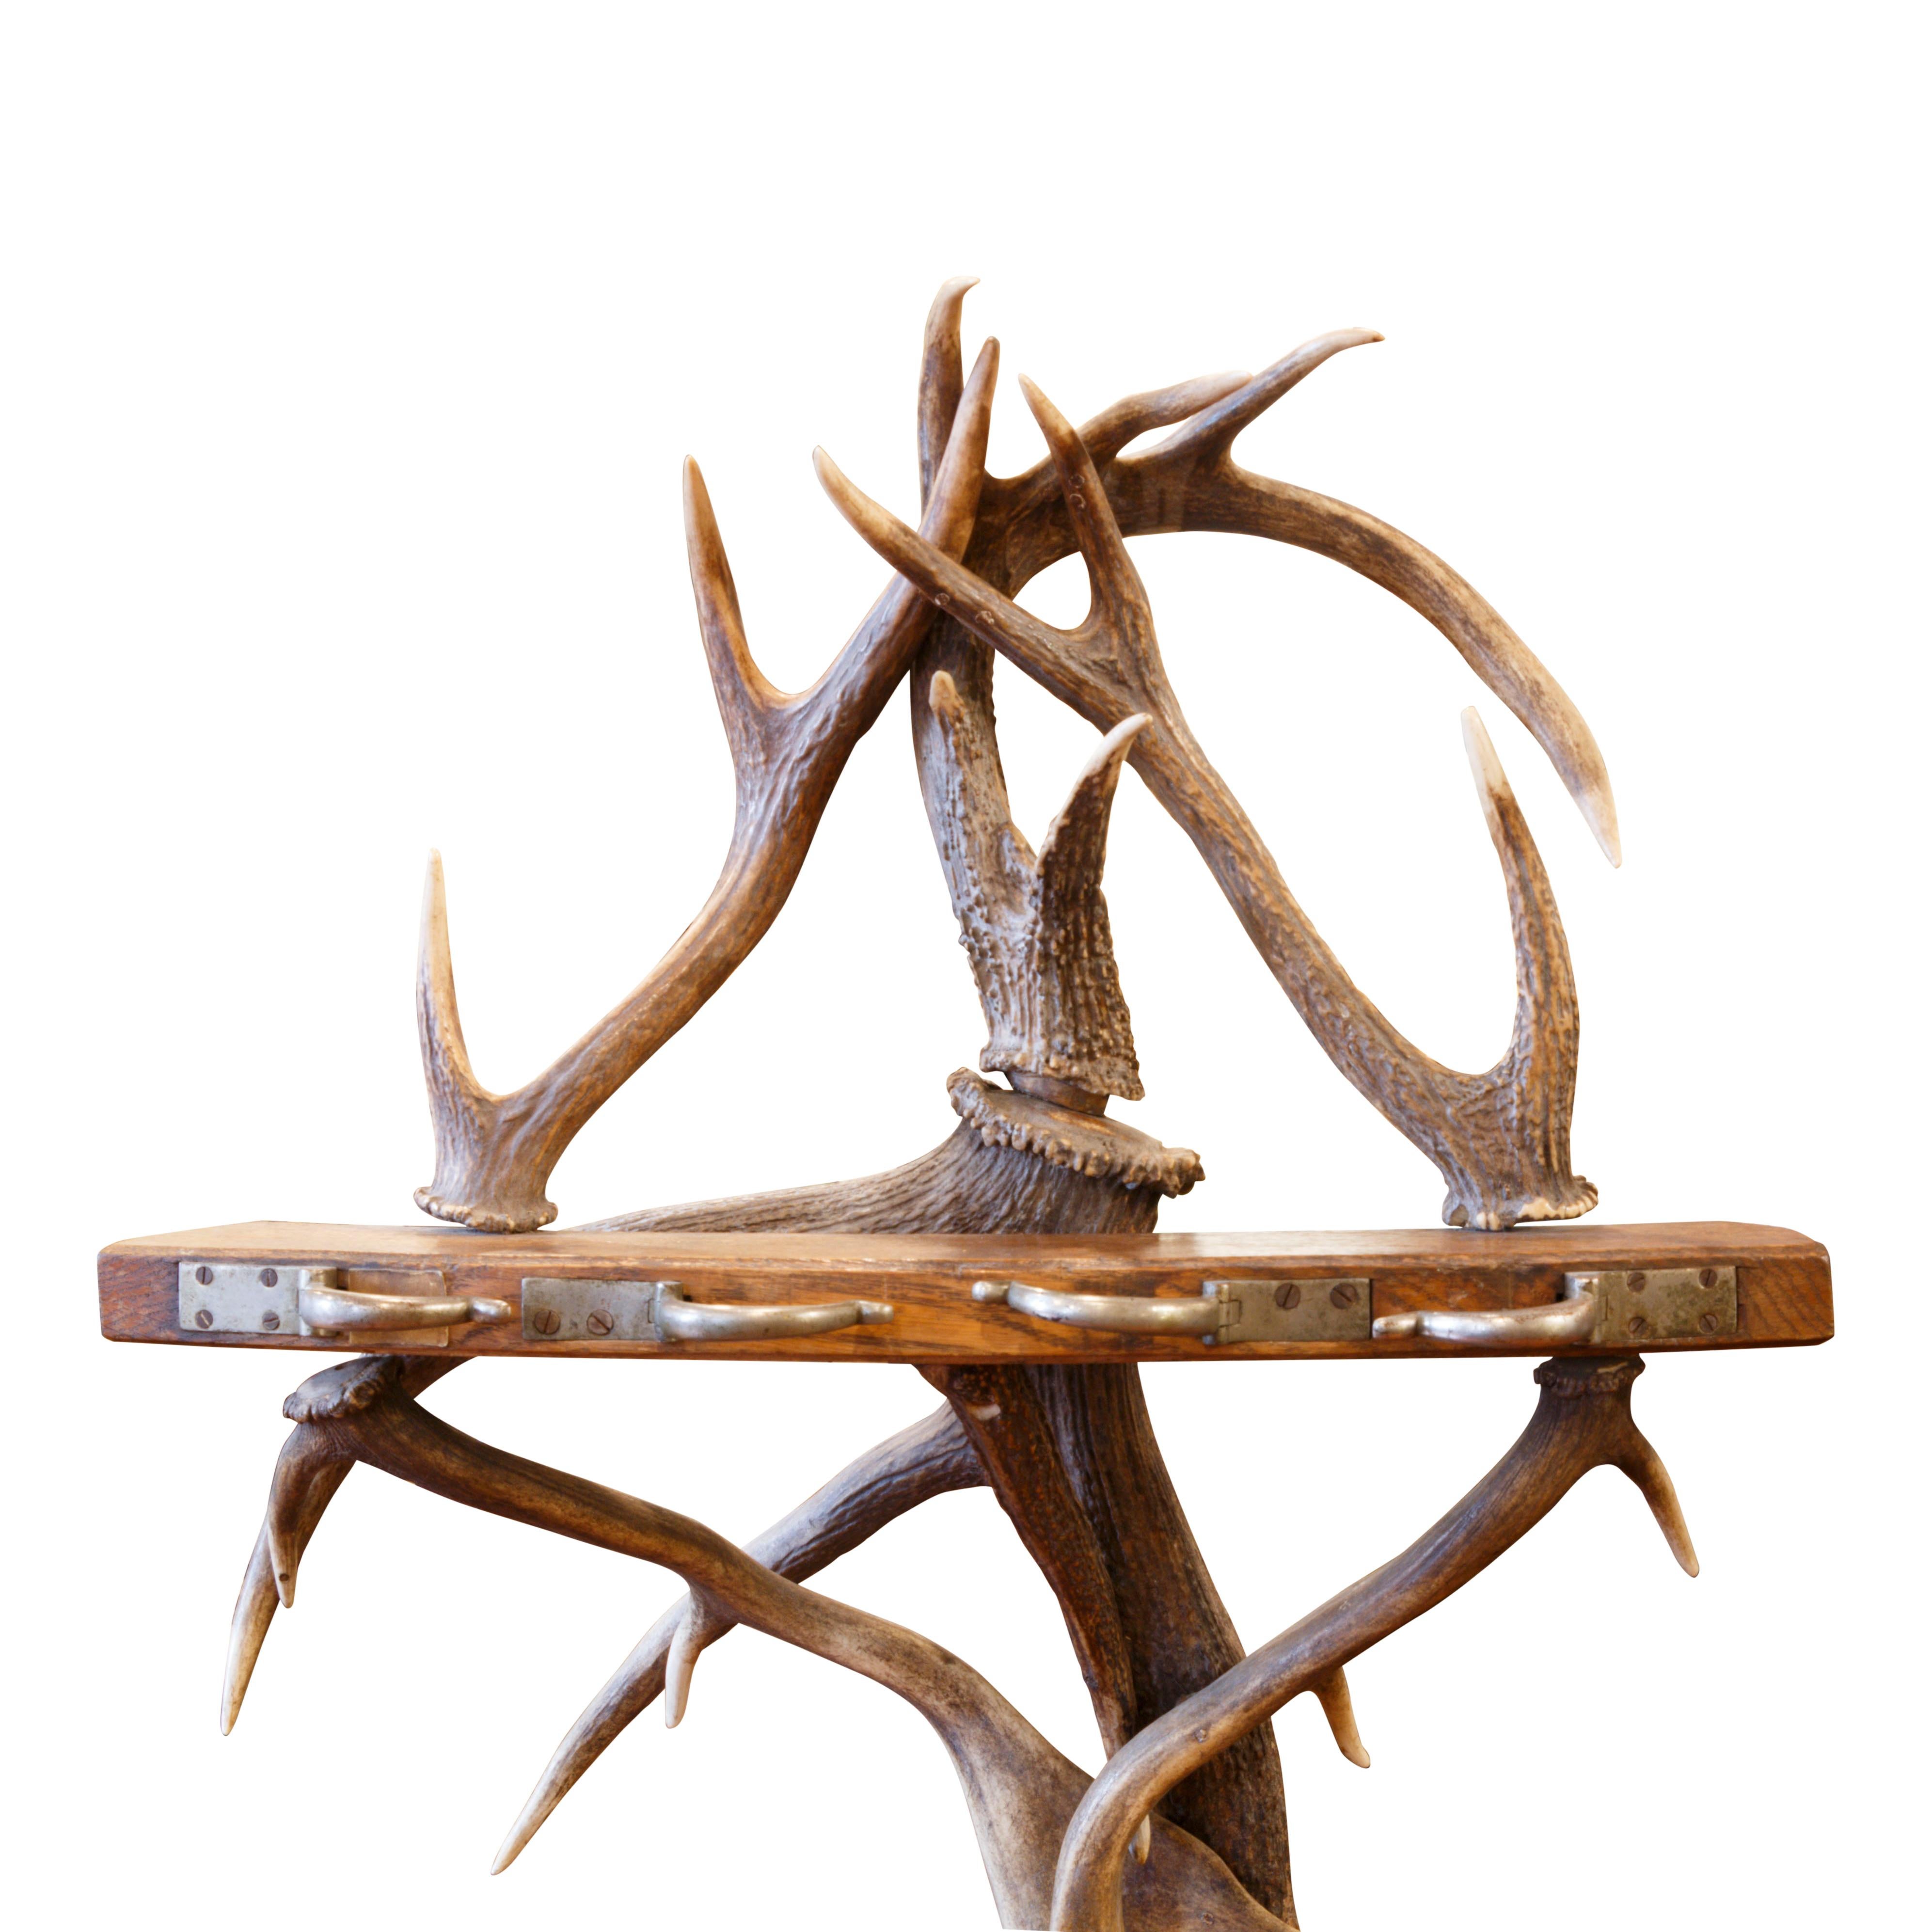 Antler mounted gun rack; ca. 1900; floor standing. Entwined antler columns supporting an oak butt rest and barrel clamps for four rifles or shotguns; 53